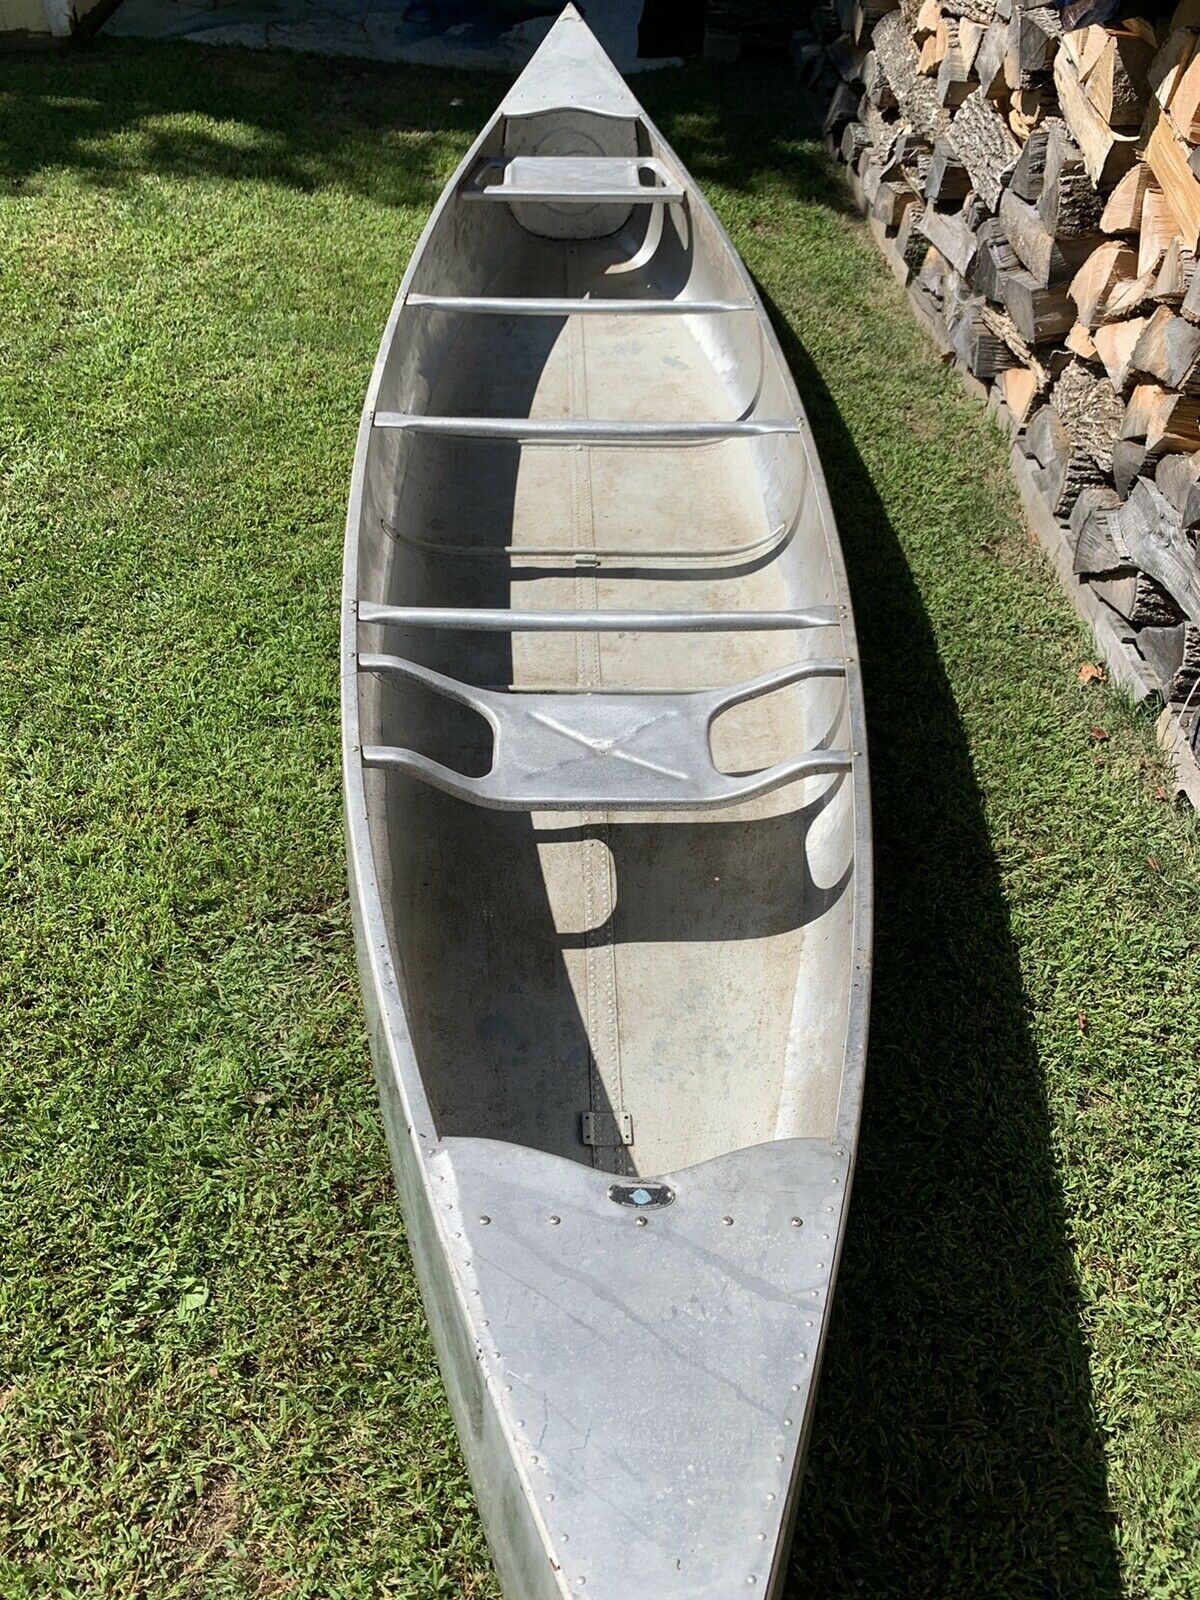 Grumman Aluminum Canoe 15 Ft, Pick Up Only, Double-ender, Vintage Very Good Cond